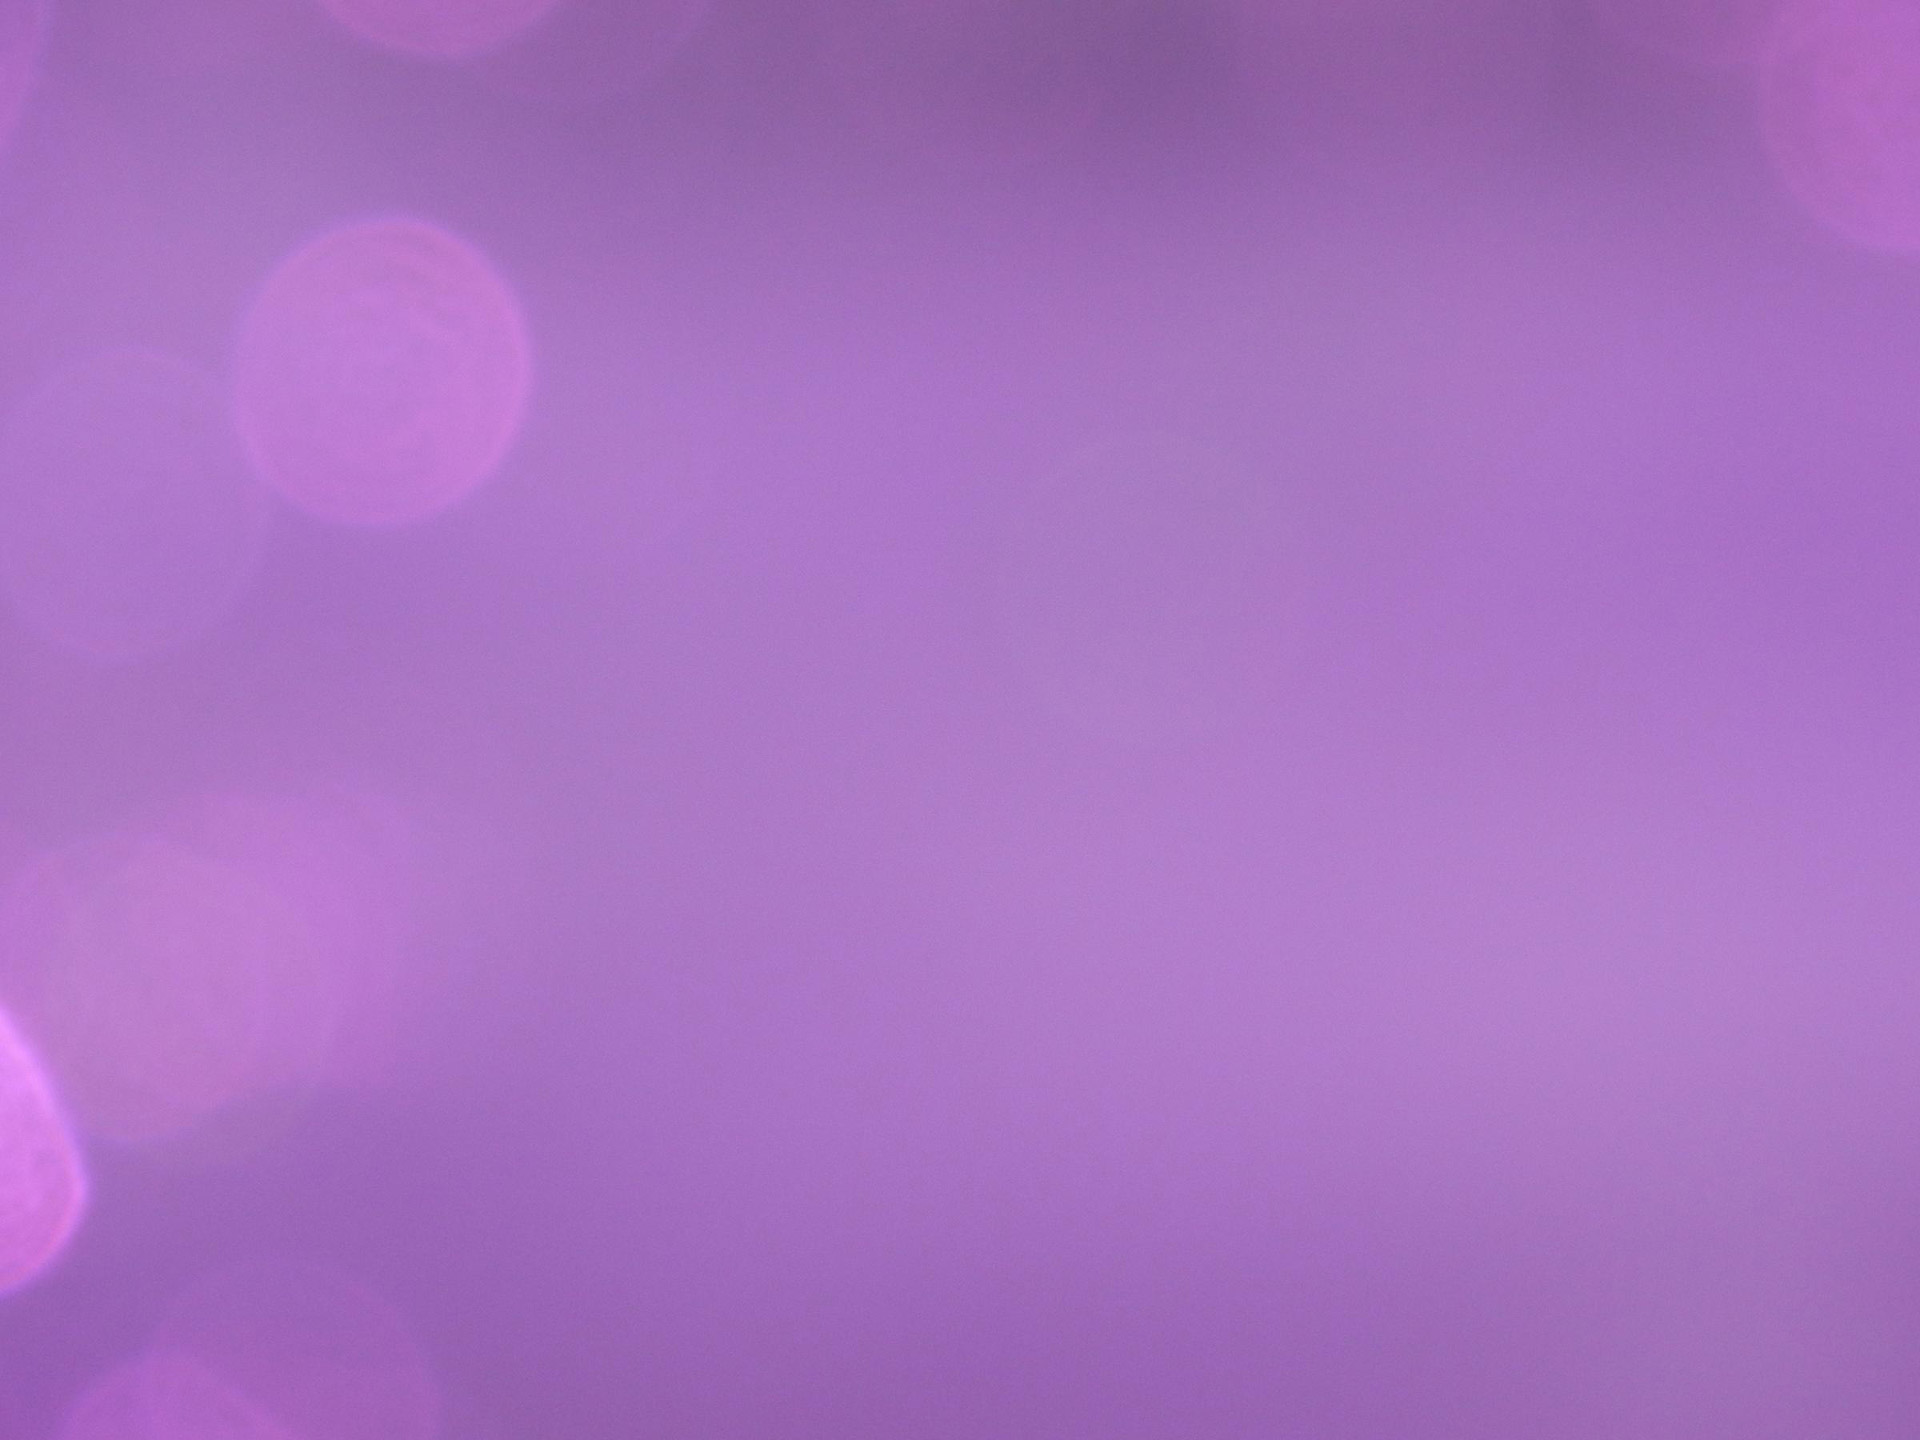 Download free photo of Background,purple,bubbles,light,effect - from  